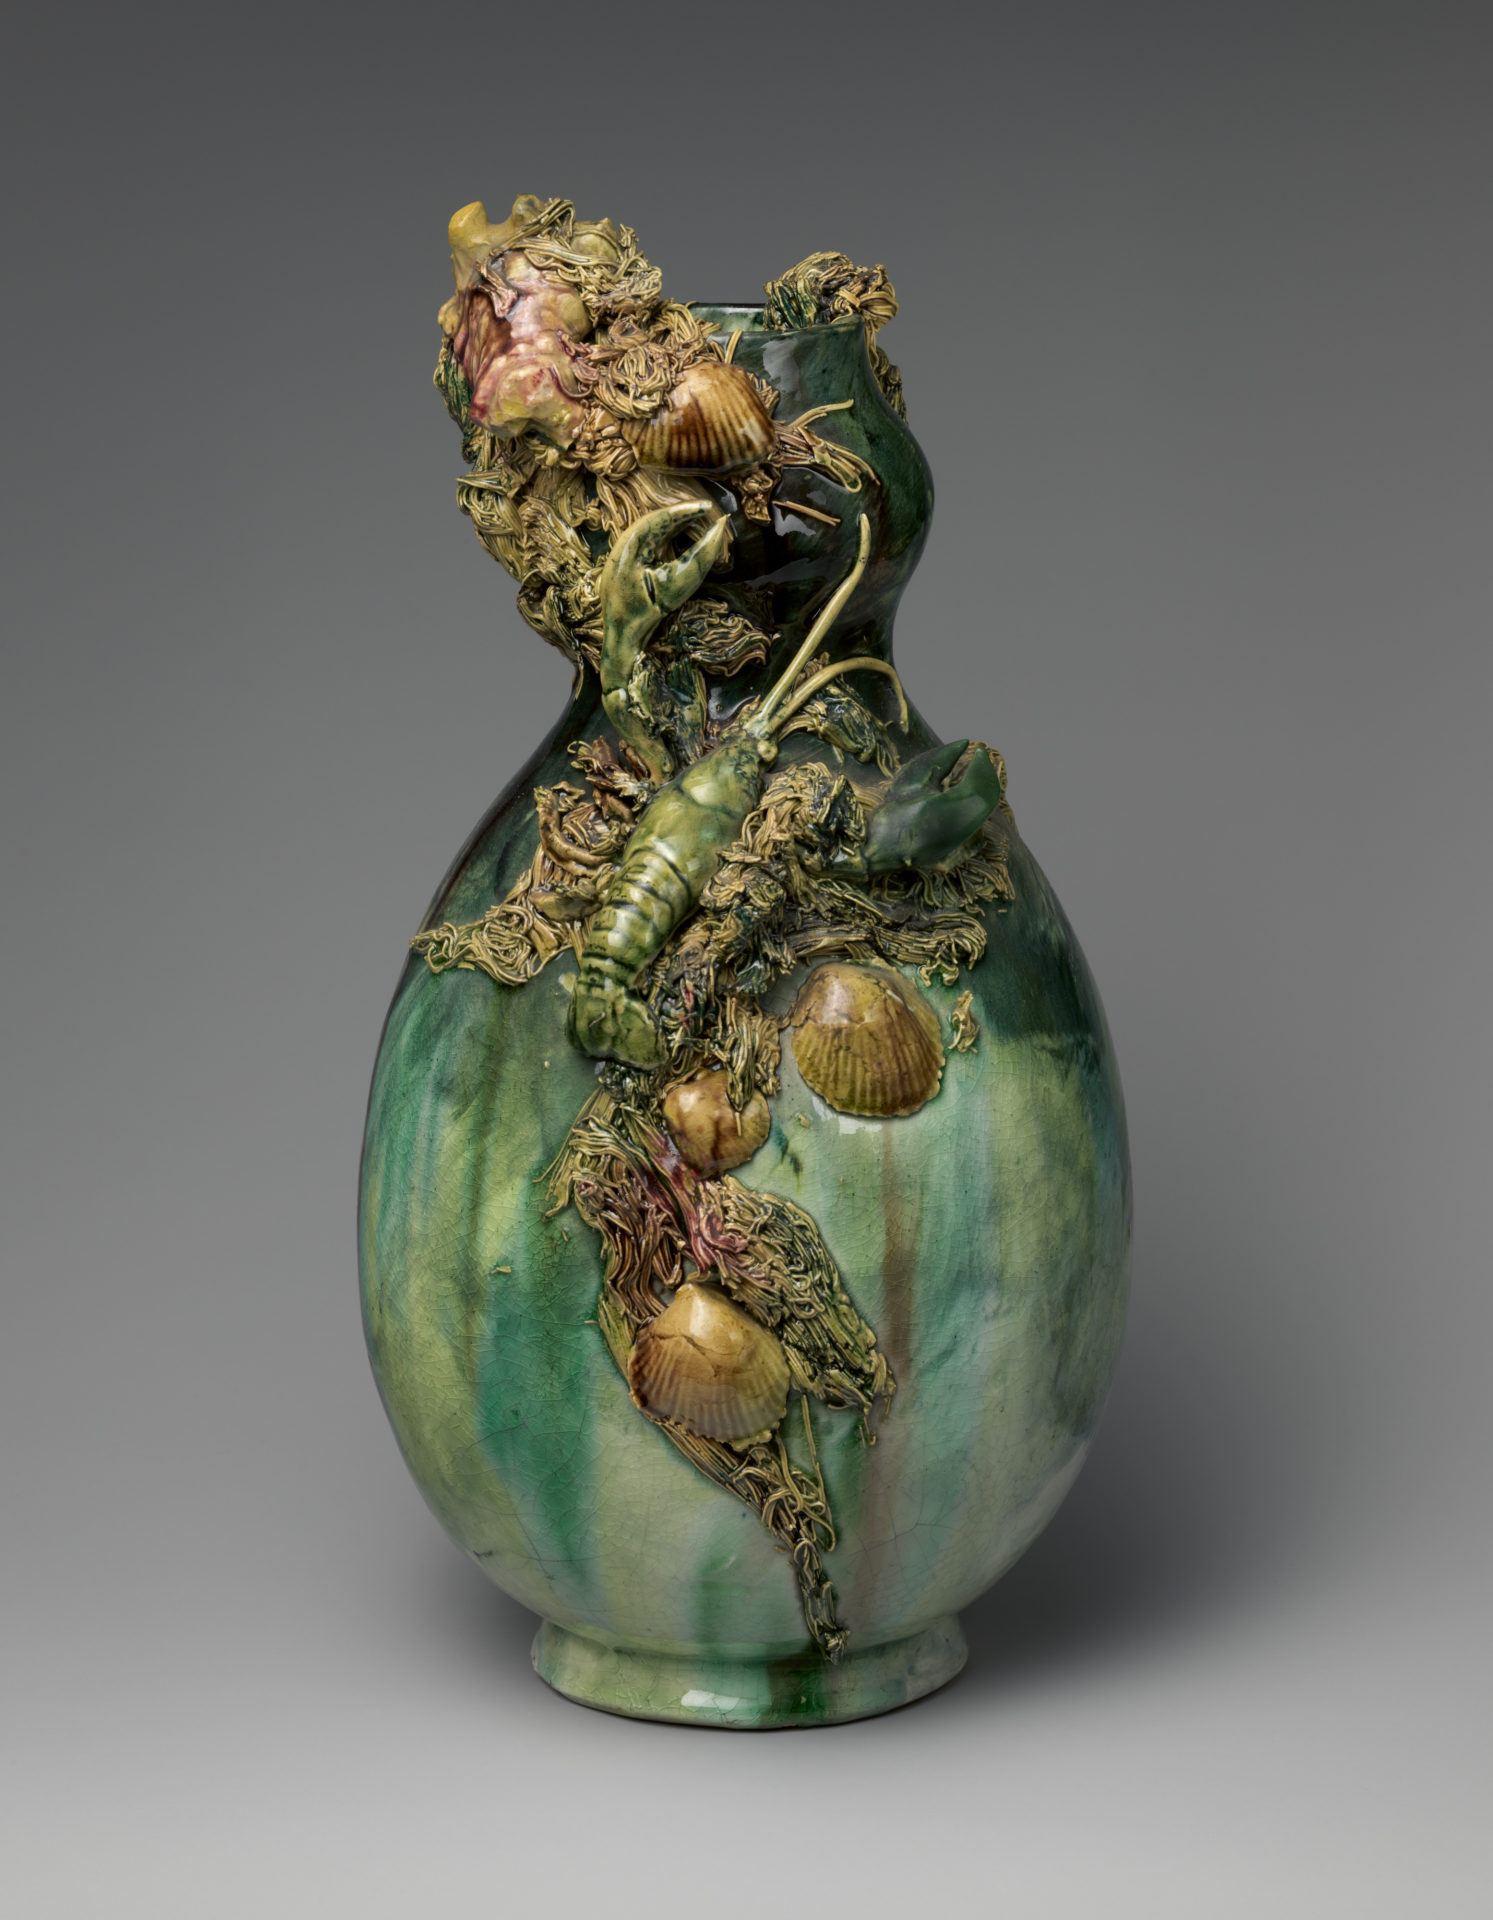 A green earthenware vase with marine animals such as lobsters and scallops embellished.